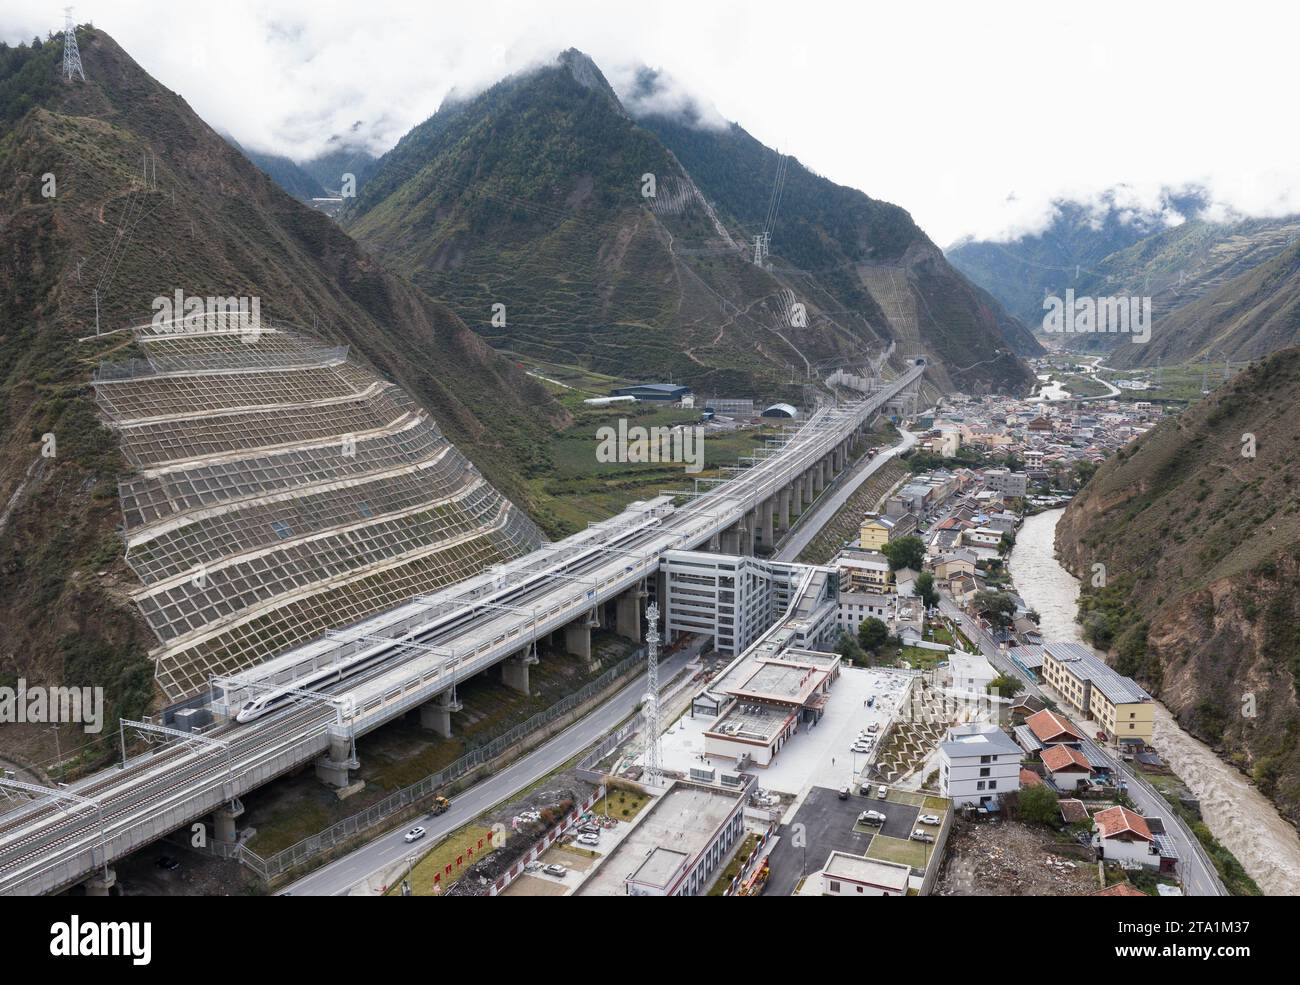 (231128) -- MAOXIAN, Nov. 28, 2023 (Xinhua) -- This aerial photo taken on Nov. 13, 2023 shows a high-speed passenger train making a stop at Zhenjiangguan railway station in southwest China's Sichuan Province. A 238-km section of the Sichuan-Qinghai railway in western China became operational on Tuesday after 12 years of construction.   The railway crosses the rugged, earthquake-prone plateau region in northwest Sichuan, and takes a detour to avoid disturbing the Giant Panda National Park.      The Sichuan-Qinghai railway will eventually stretch northwestward to Xining, the capital city of Qing Stock Photo